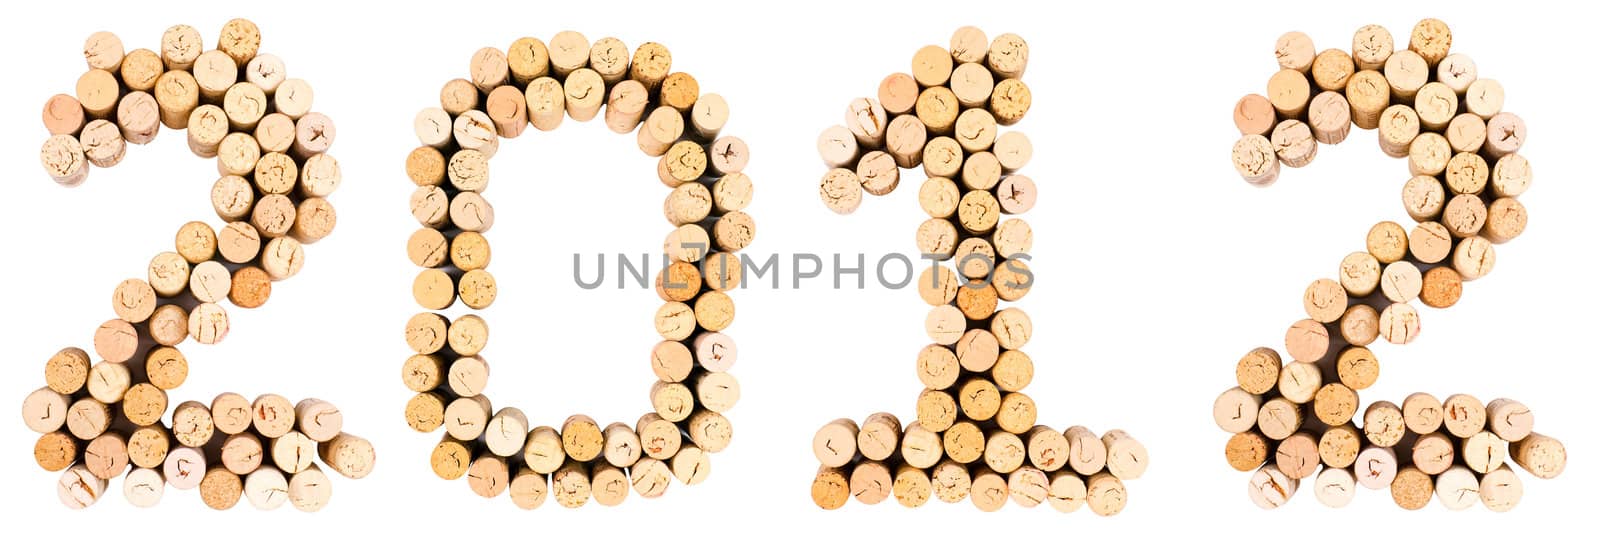 Inscription '2012' from the wine corks on white background